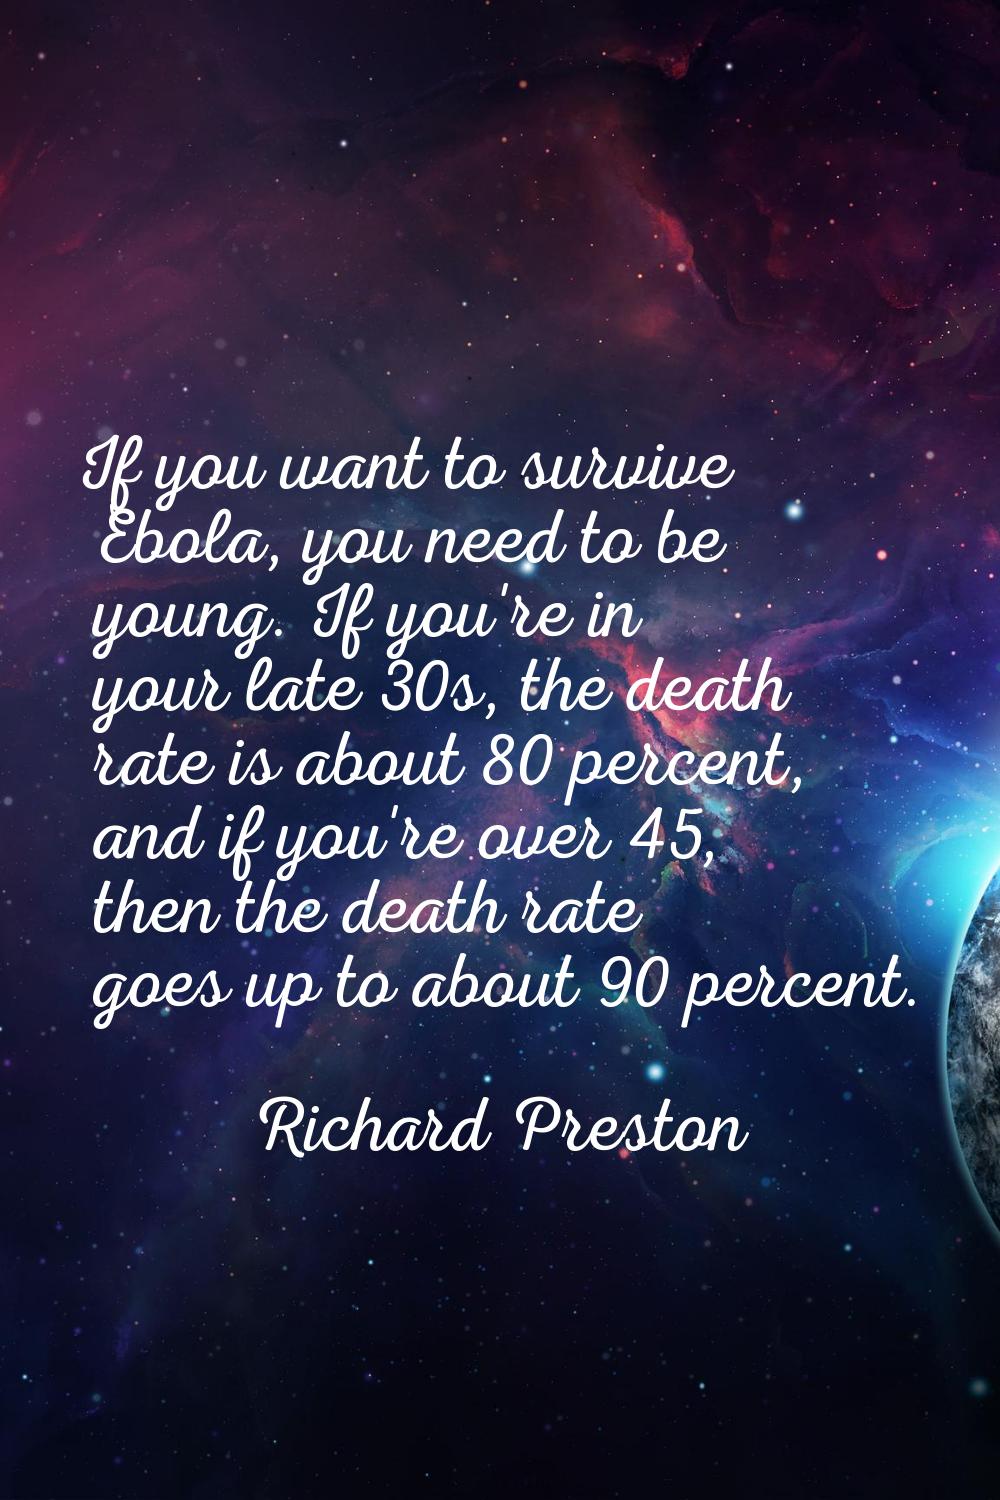 If you want to survive Ebola, you need to be young. If you're in your late 30s, the death rate is a